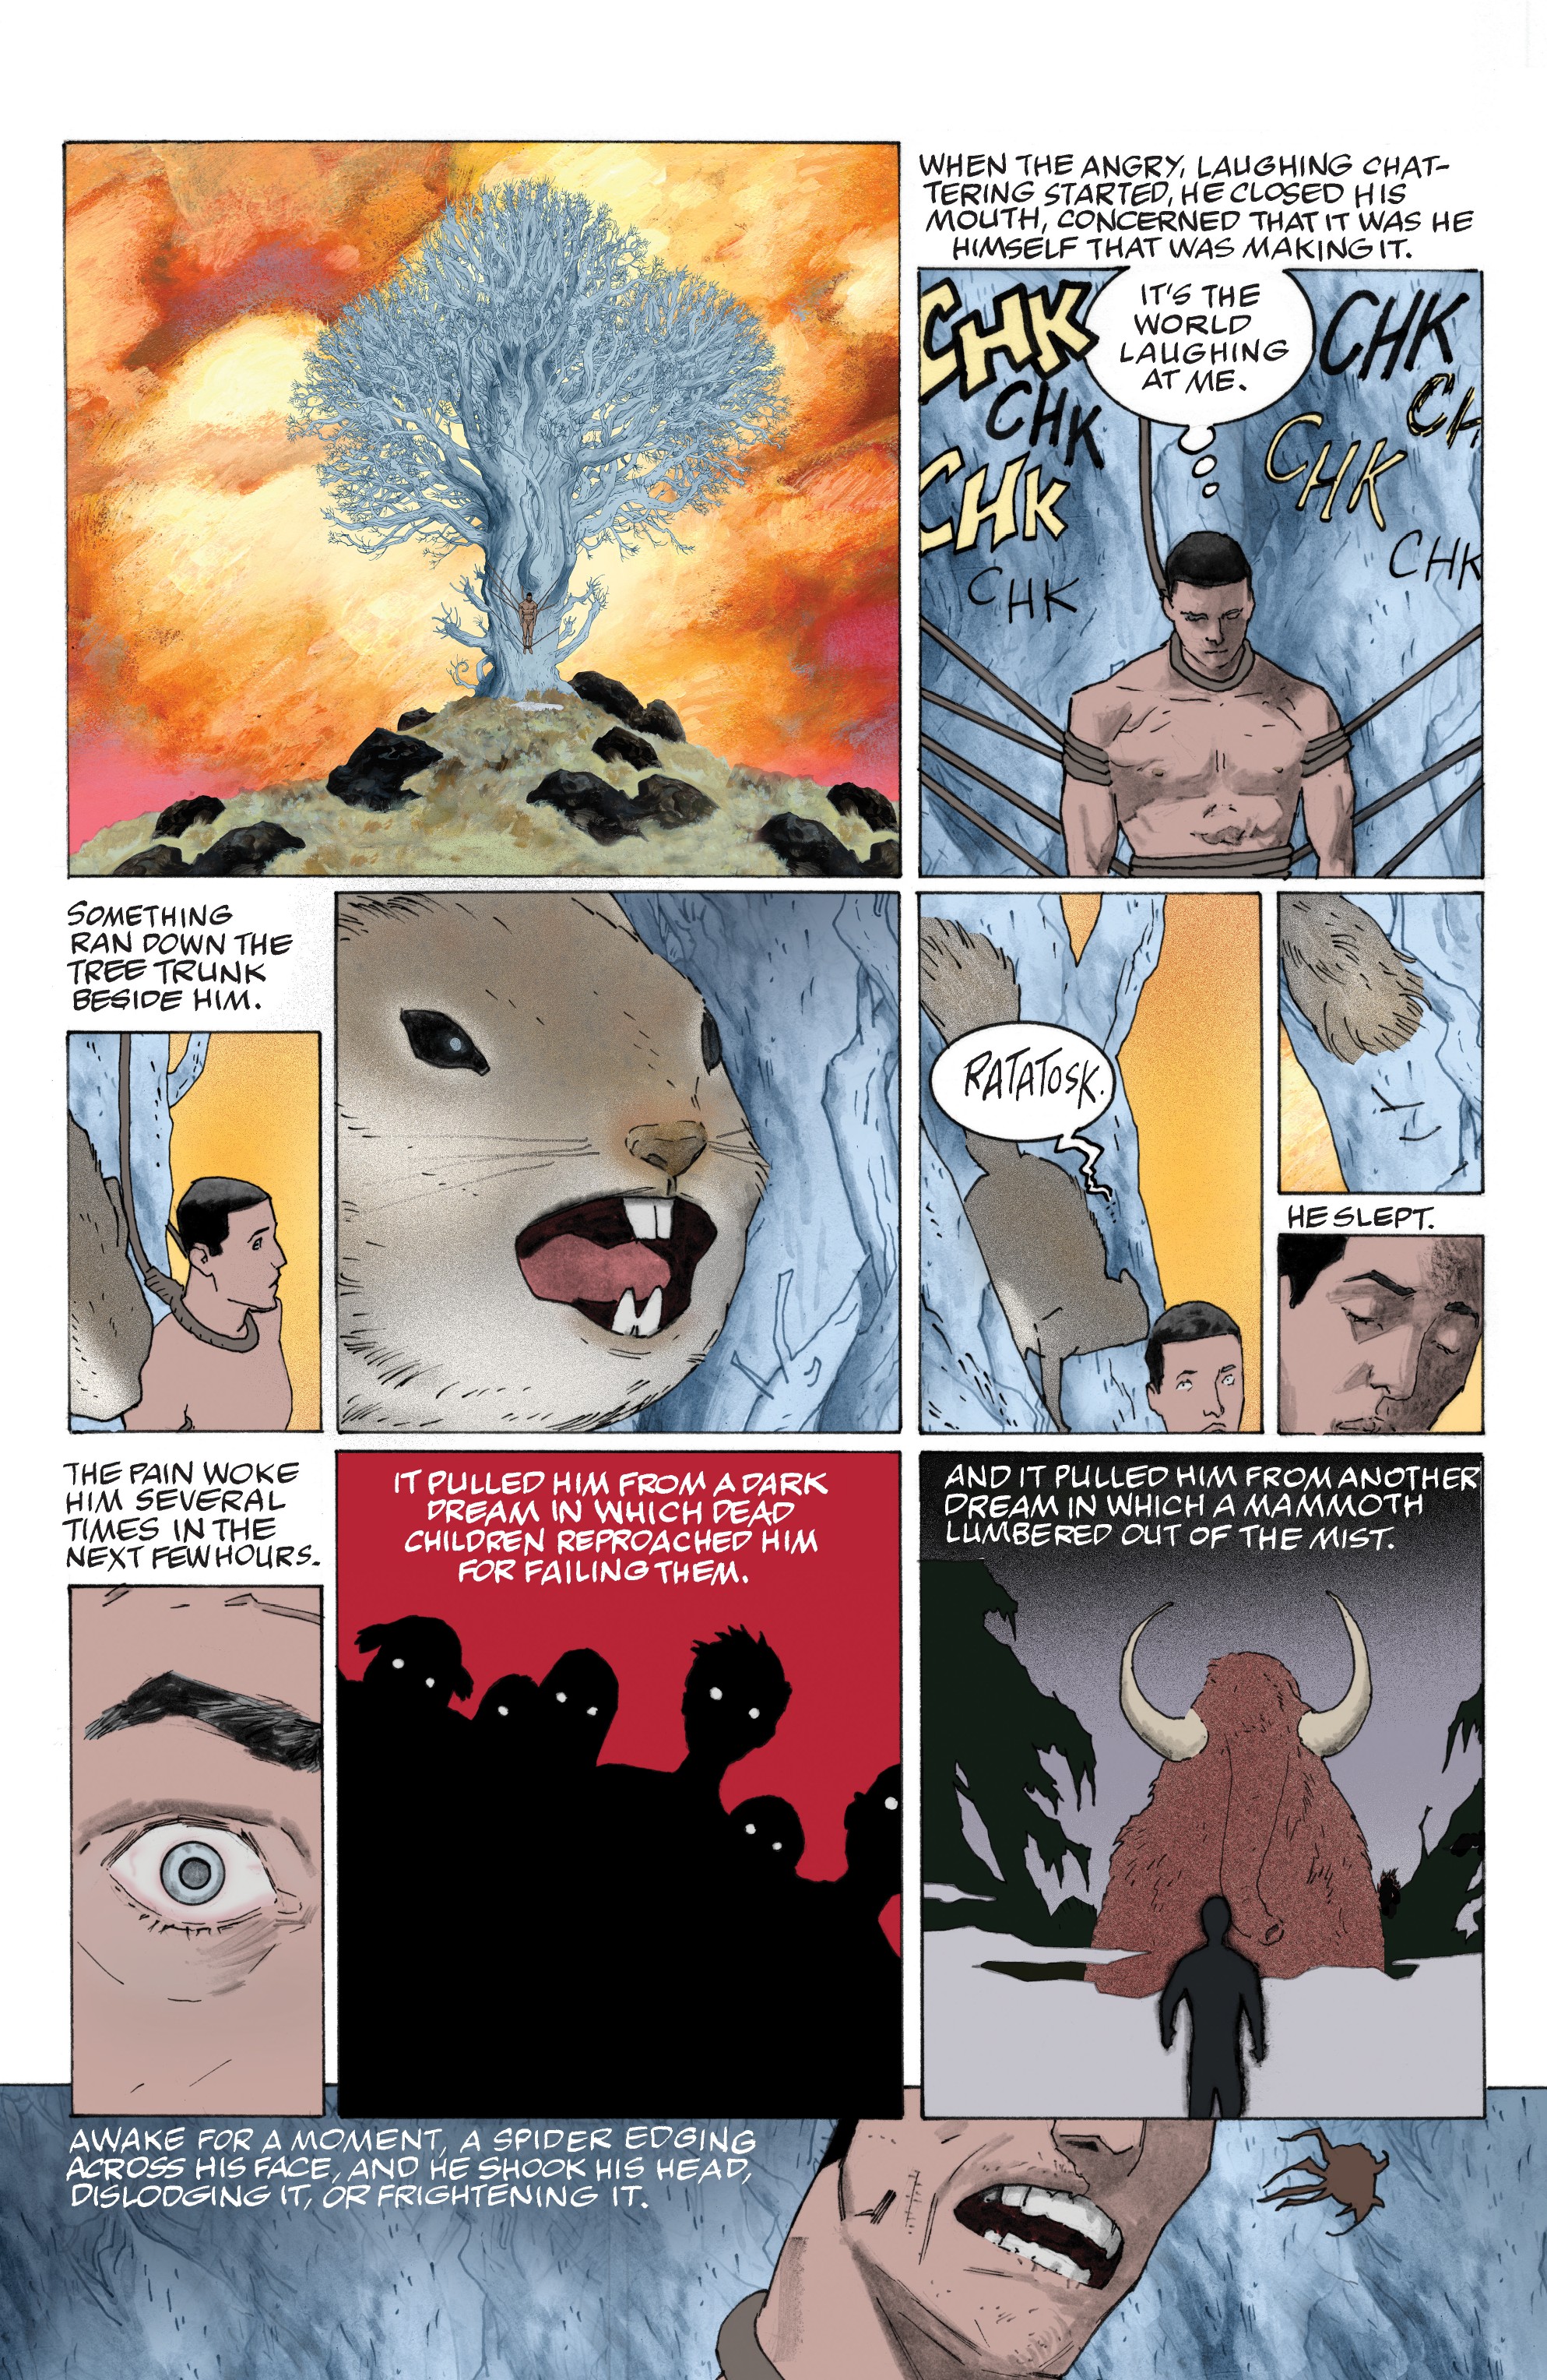 American Gods: The Moment of the Storm (2019): Chapter 3 - Page 4